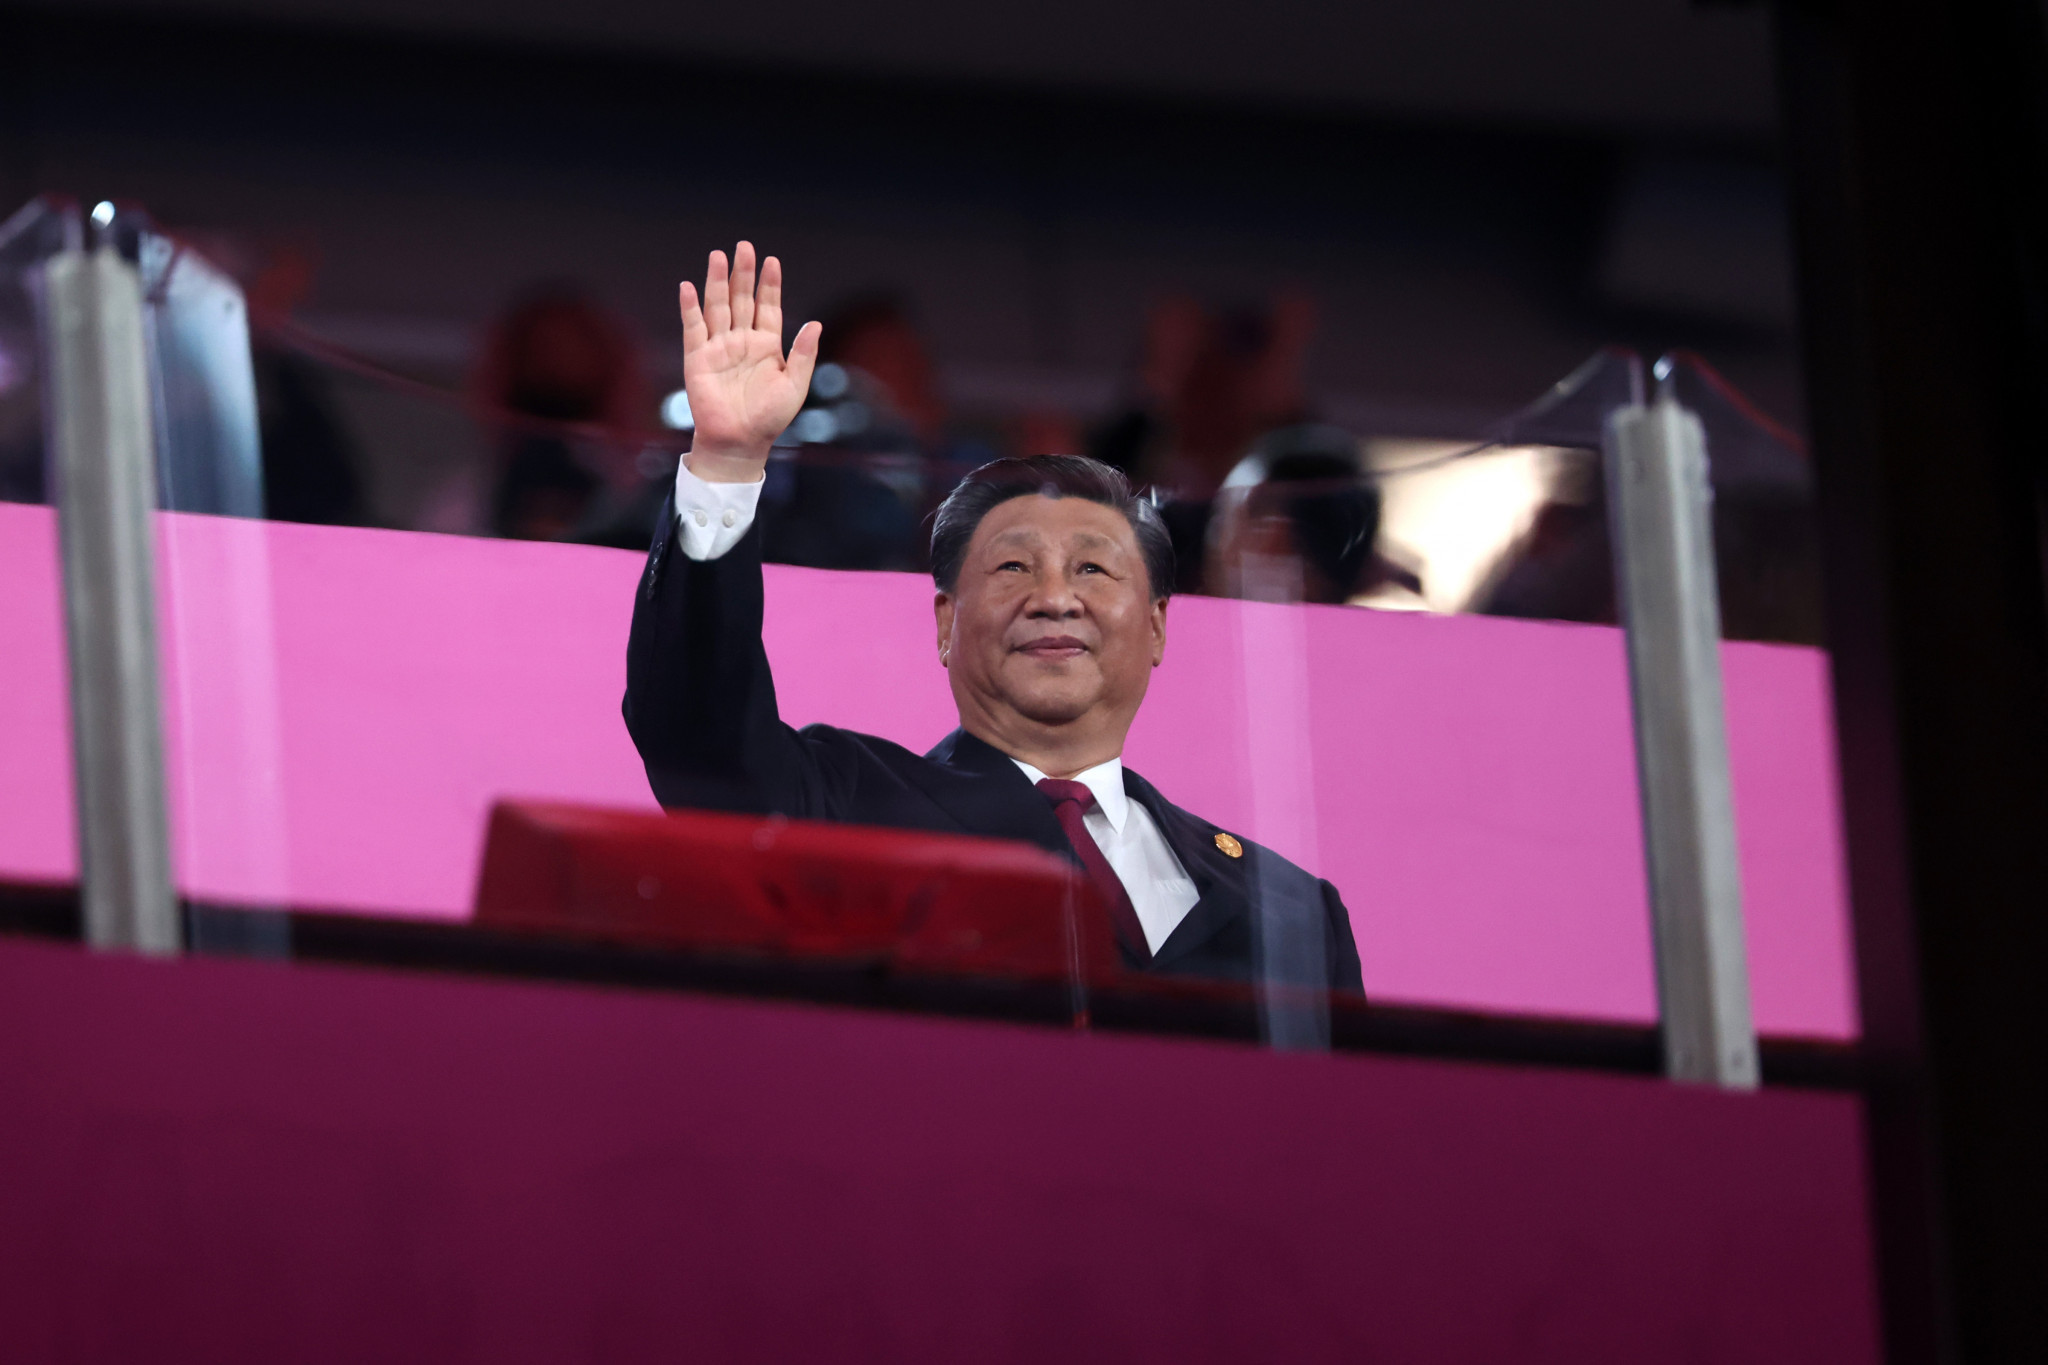 Xi Jinping was greeted warmly and he was even paid tribute to by the Hong Kong delegation during the Parade of Nations ©Getty Images